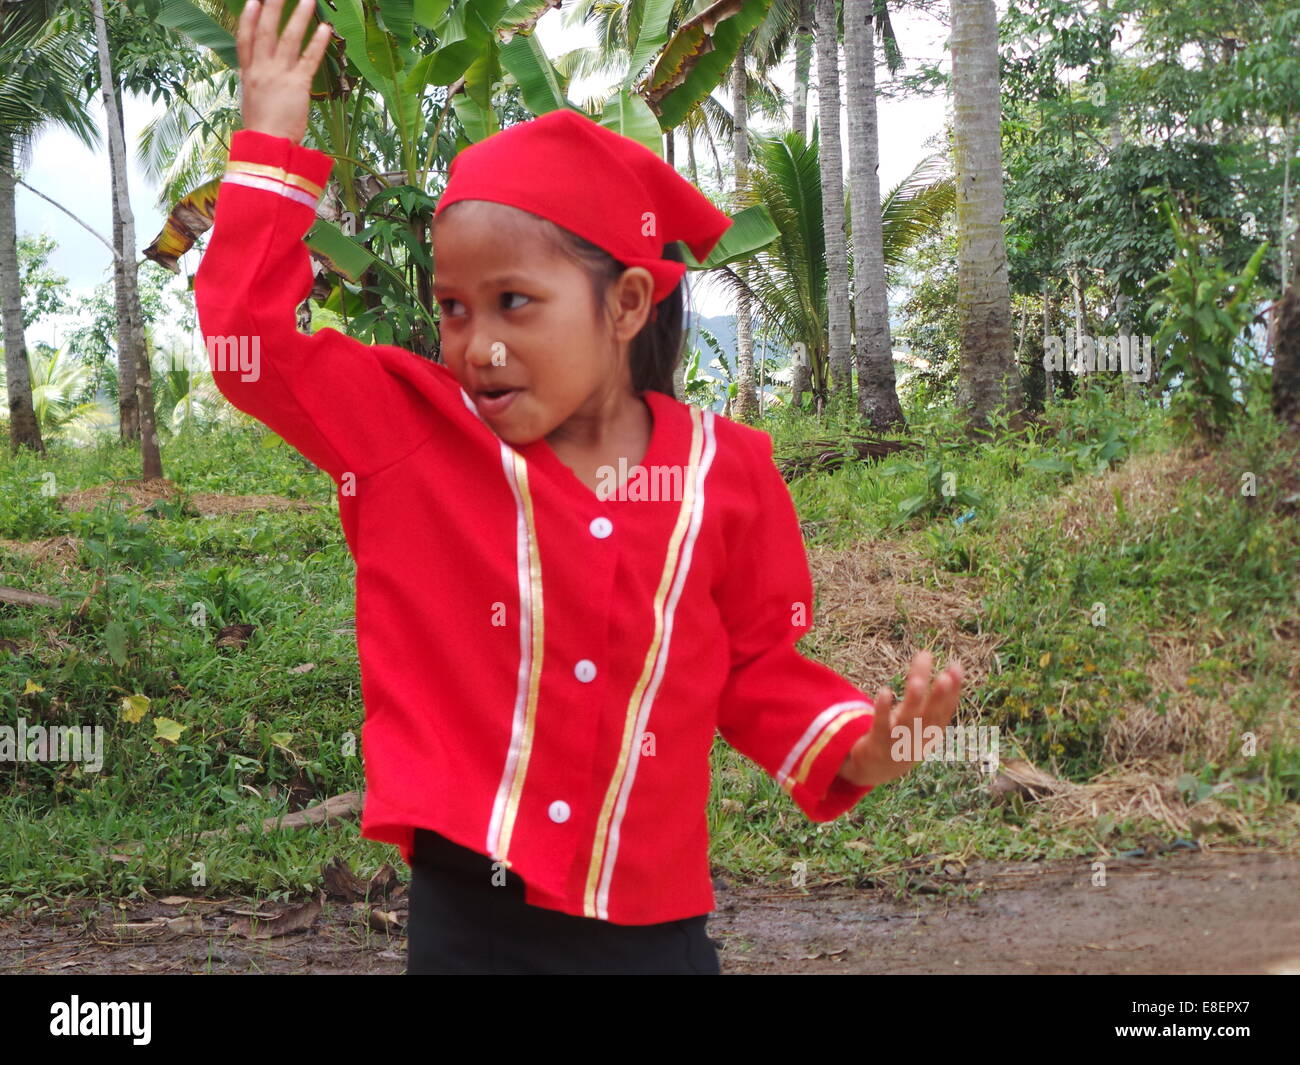 Young kid performs different Subanen dances. Subanen is one of the endangered tribes in Mindanao. Dumingag town in Zamboanga del Sur province in the island of Mindanao is adhering in preserving the cultures and traditions of their town, as a matter of fact during town fiestas, pop dance are prohibited and traditional songs and dances are promoted to alleviate their cultural pride. © Sherbien Dacalanio/Pacific Press/Alamy Live News Stock Photo